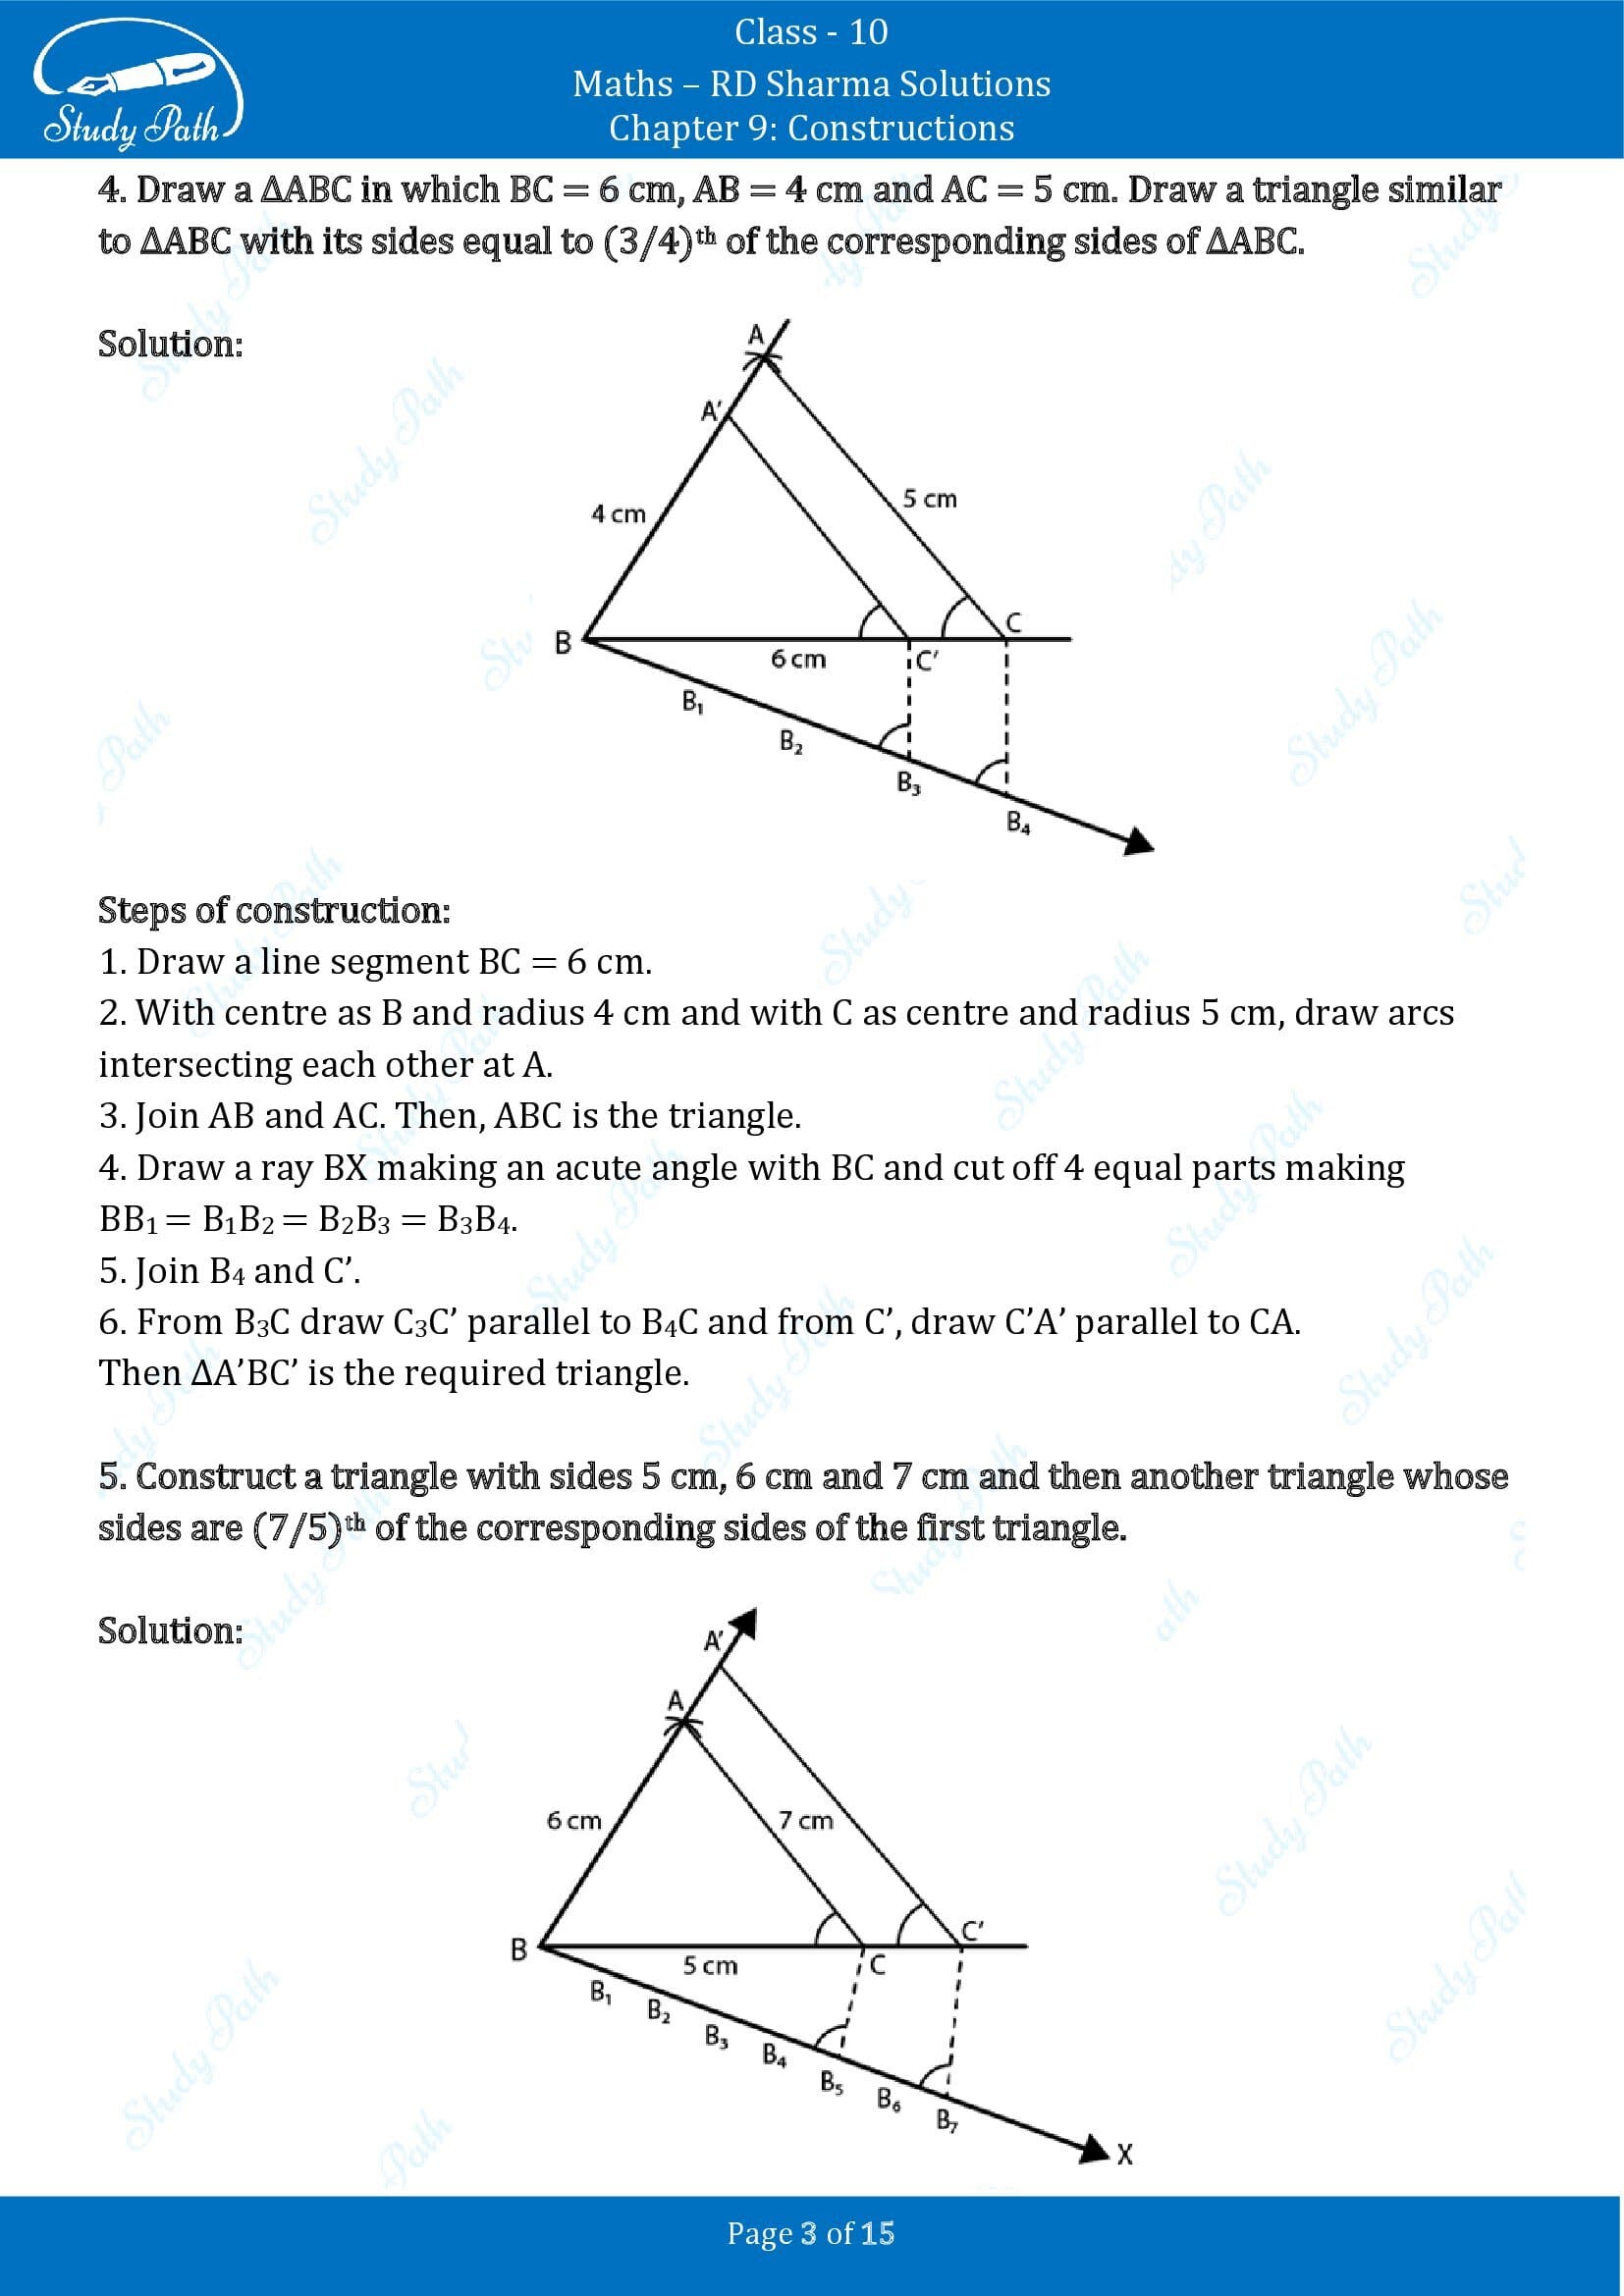 RD Sharma Solutions Class 10 Chapter 9 Constructions Exercise 9.2 00003